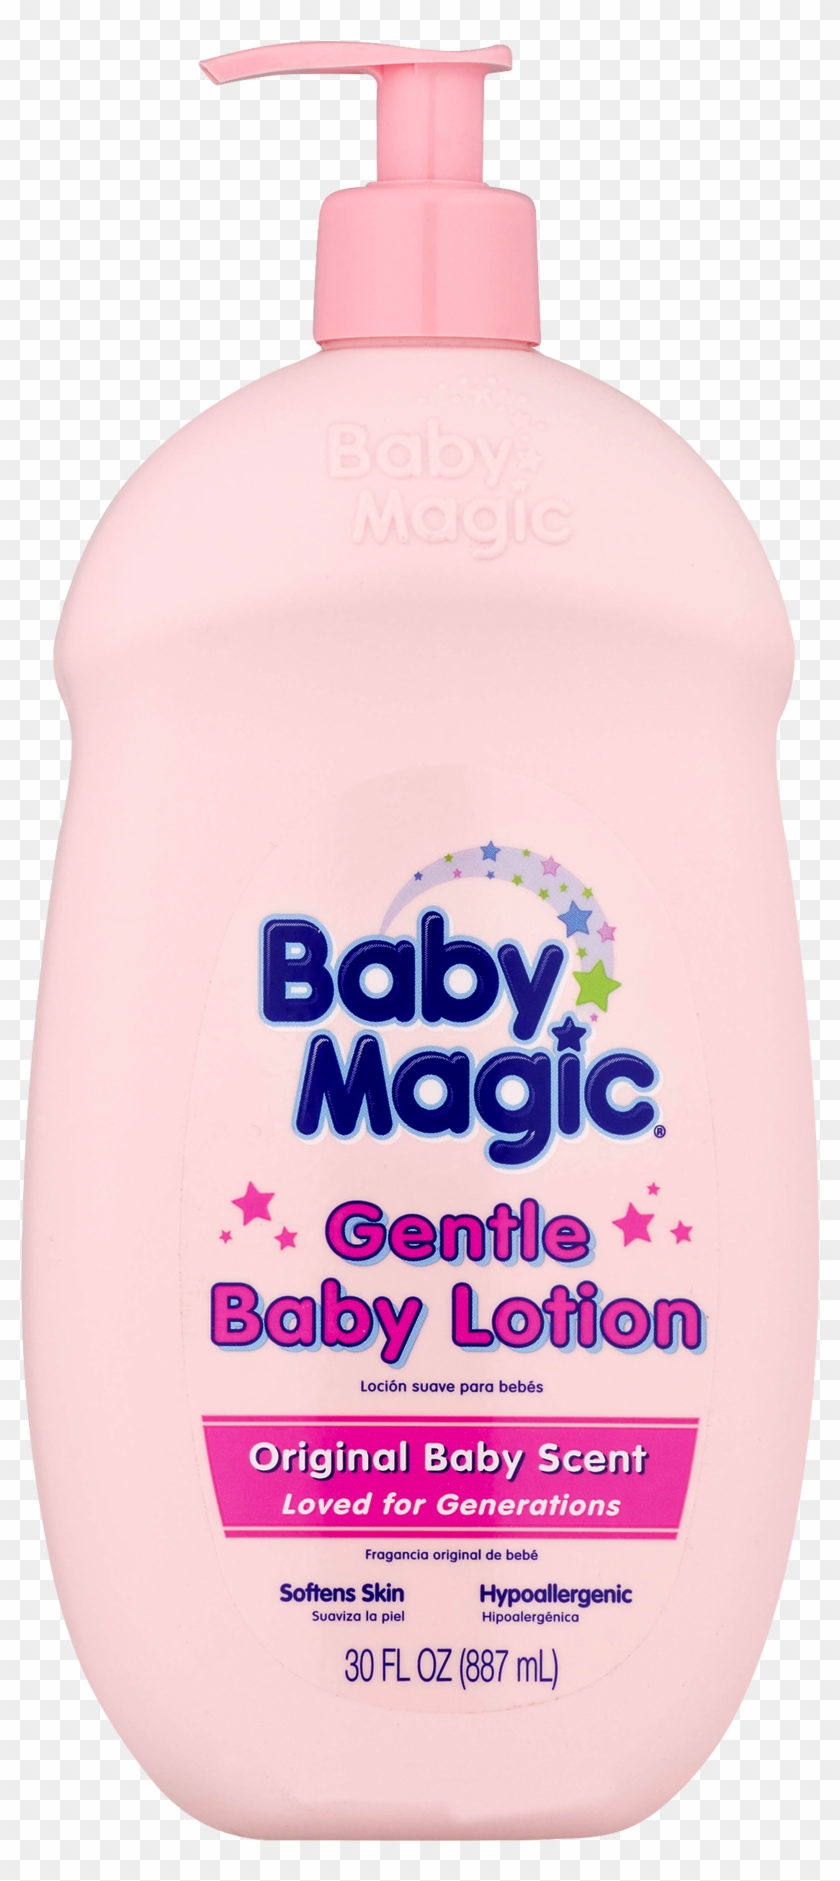 Baby Magic Gentle Baby Lotion Original Baby Scent, - Baby Magic Clipart